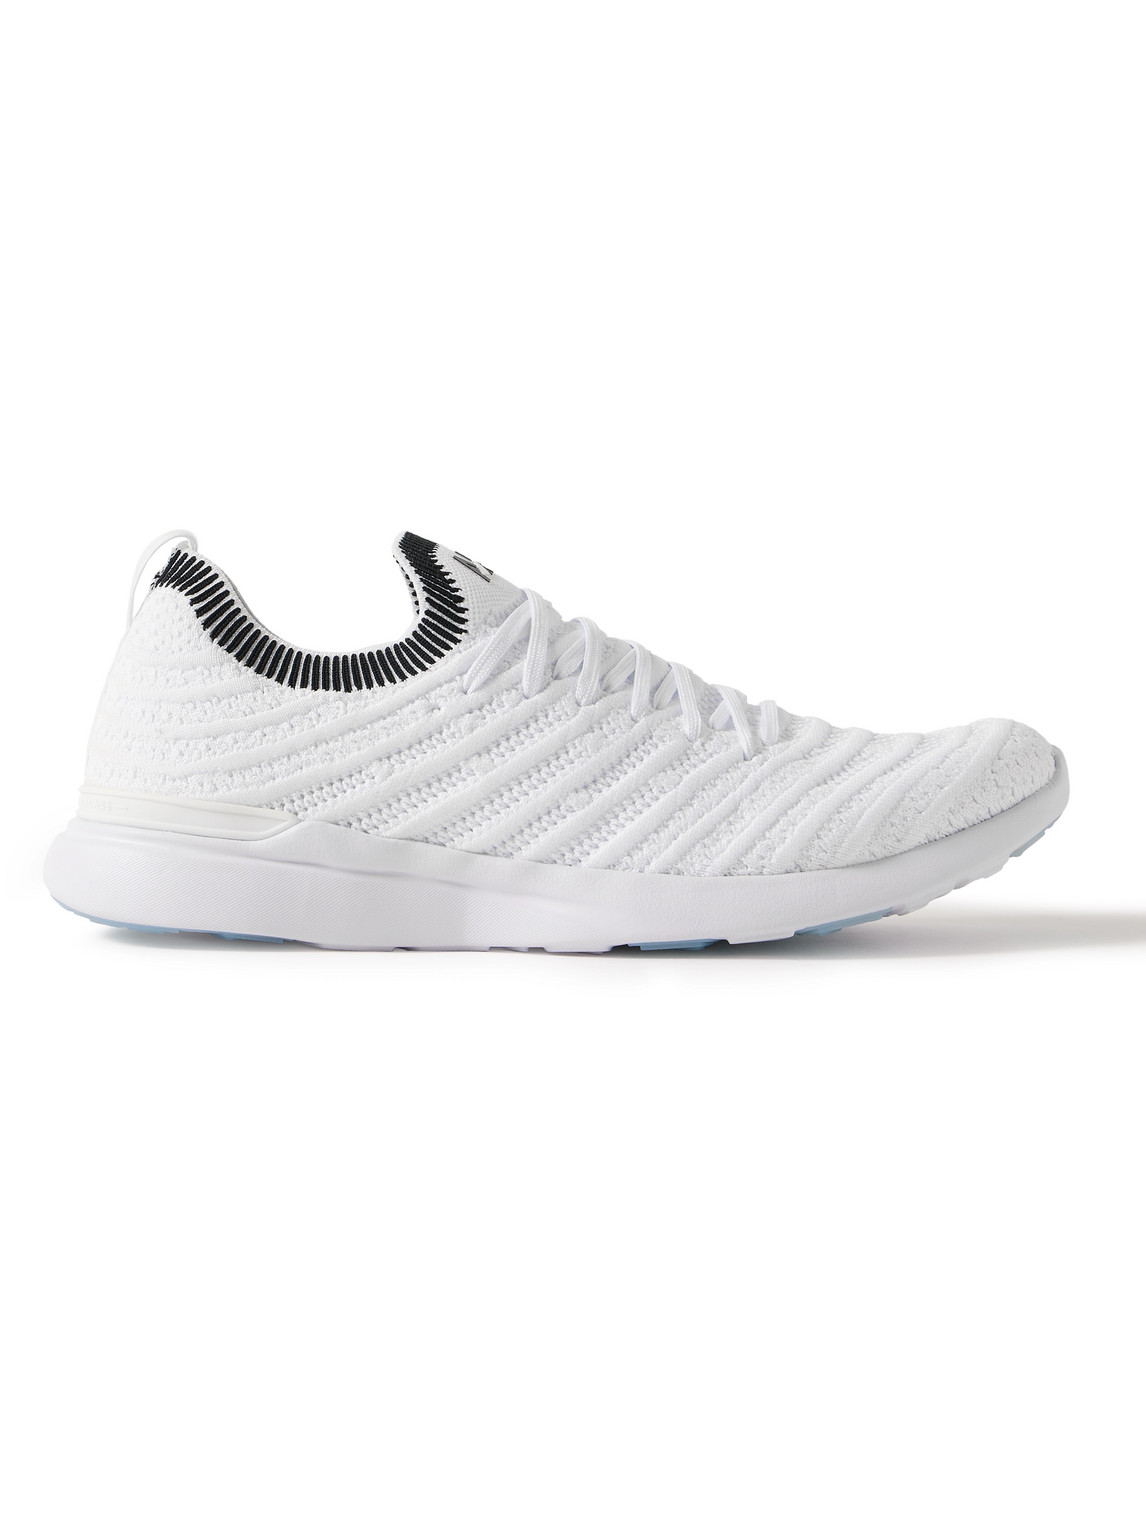 Apl Athletic Propulsion Labs Techloom Wave Running Trainers In White